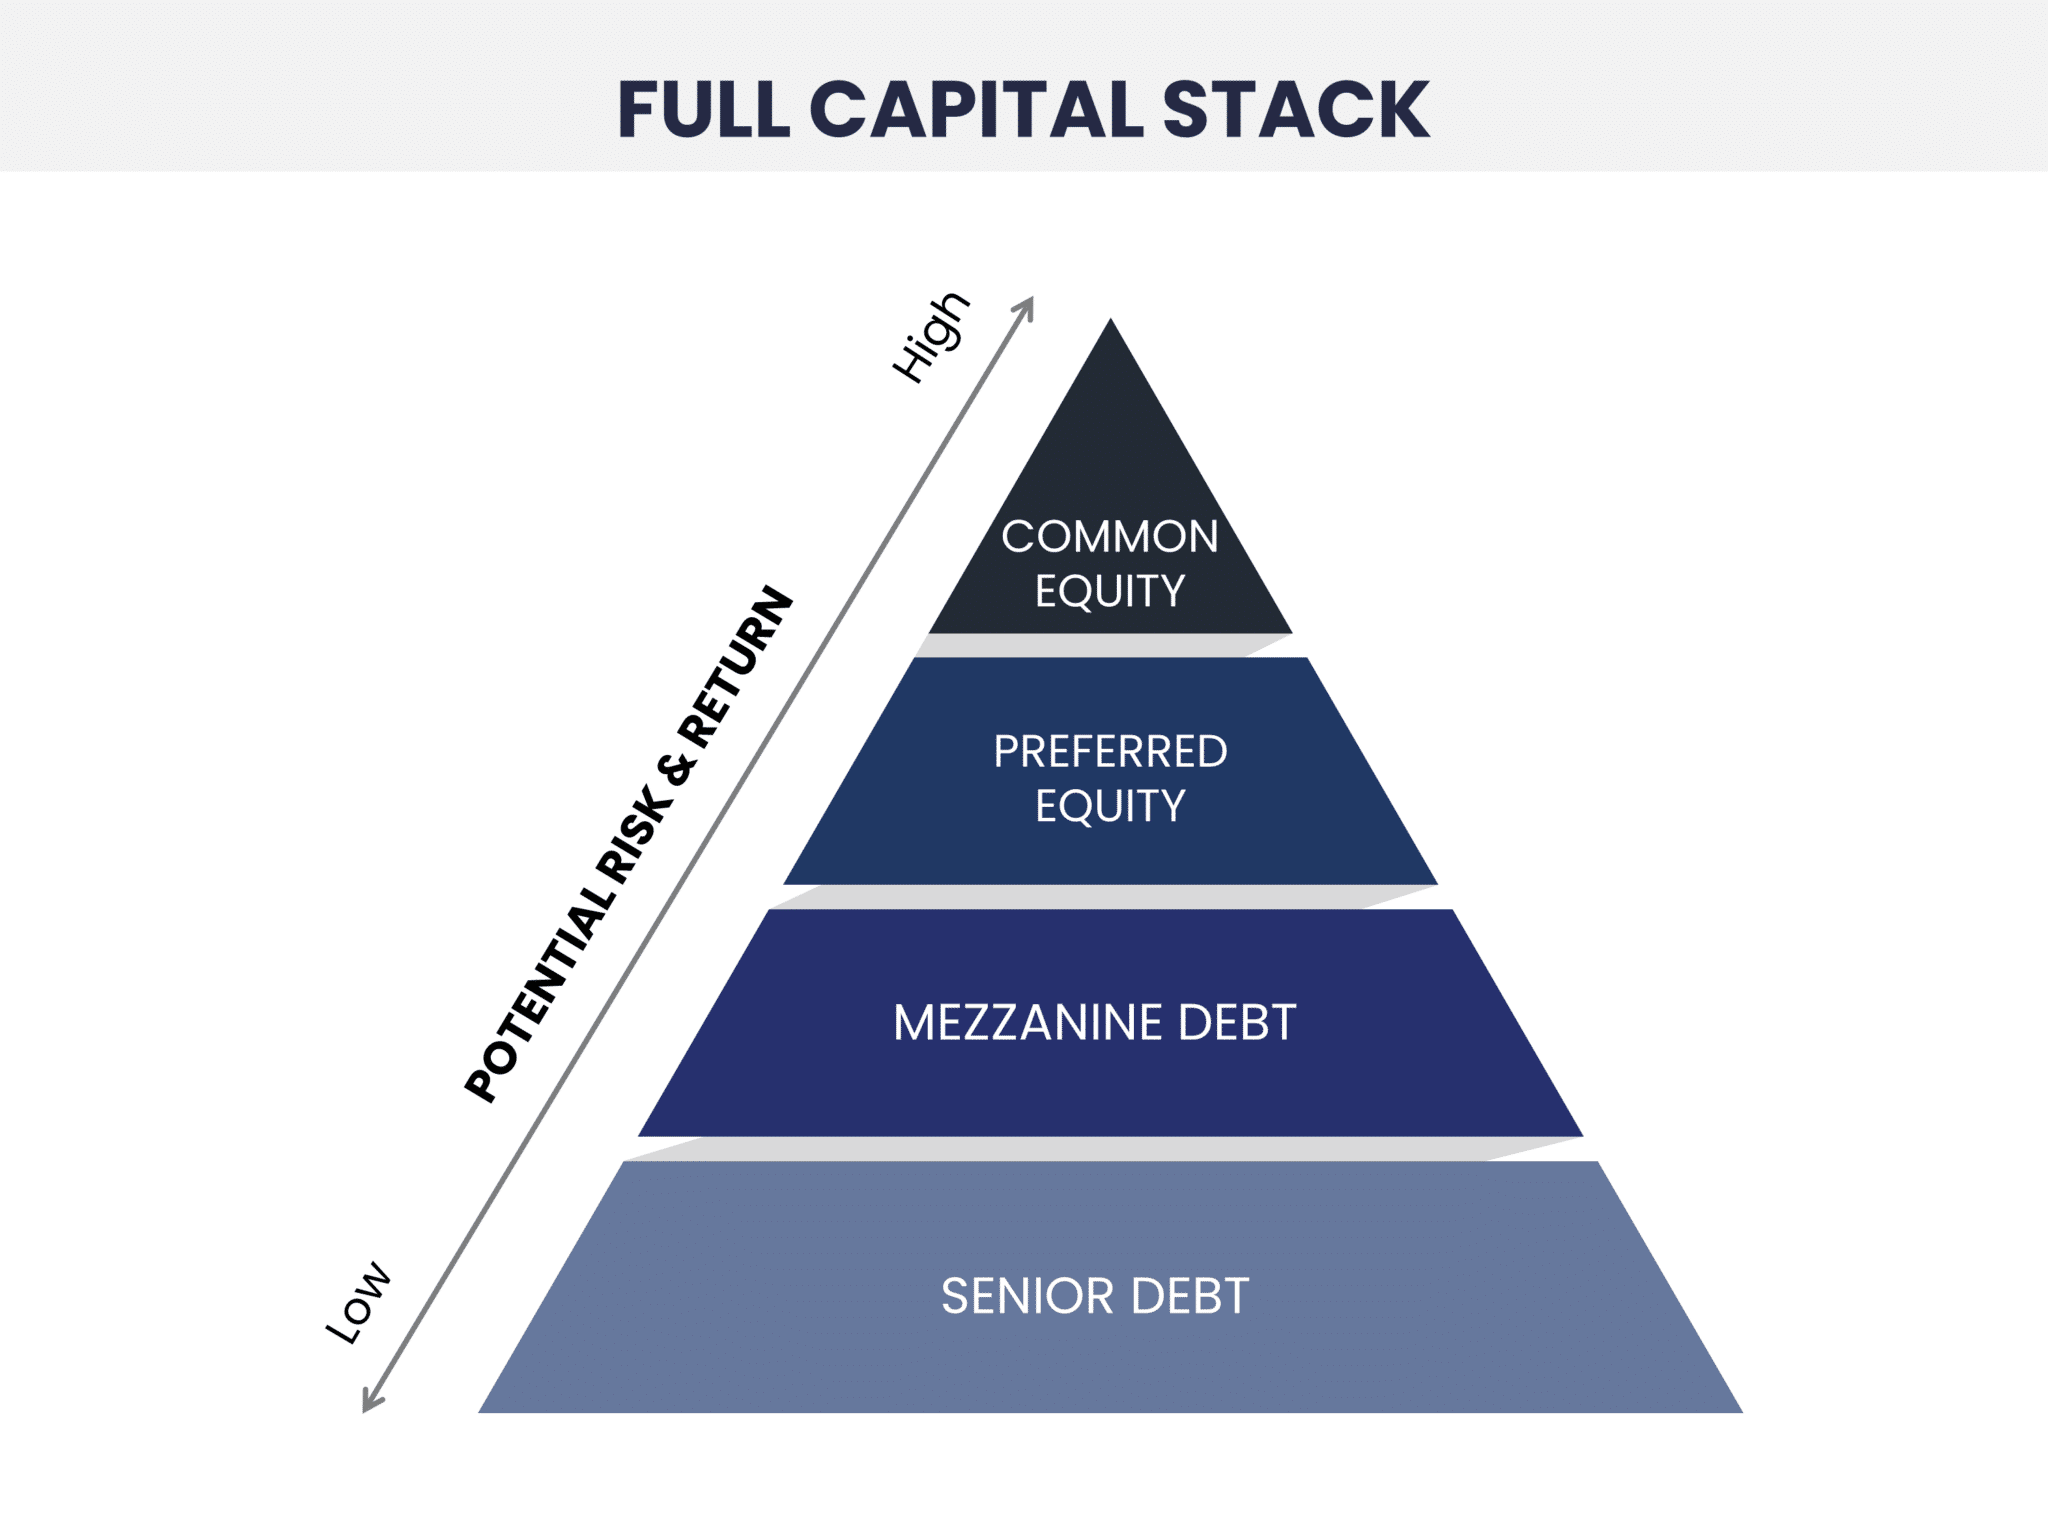 What is a capital stack in real estate?